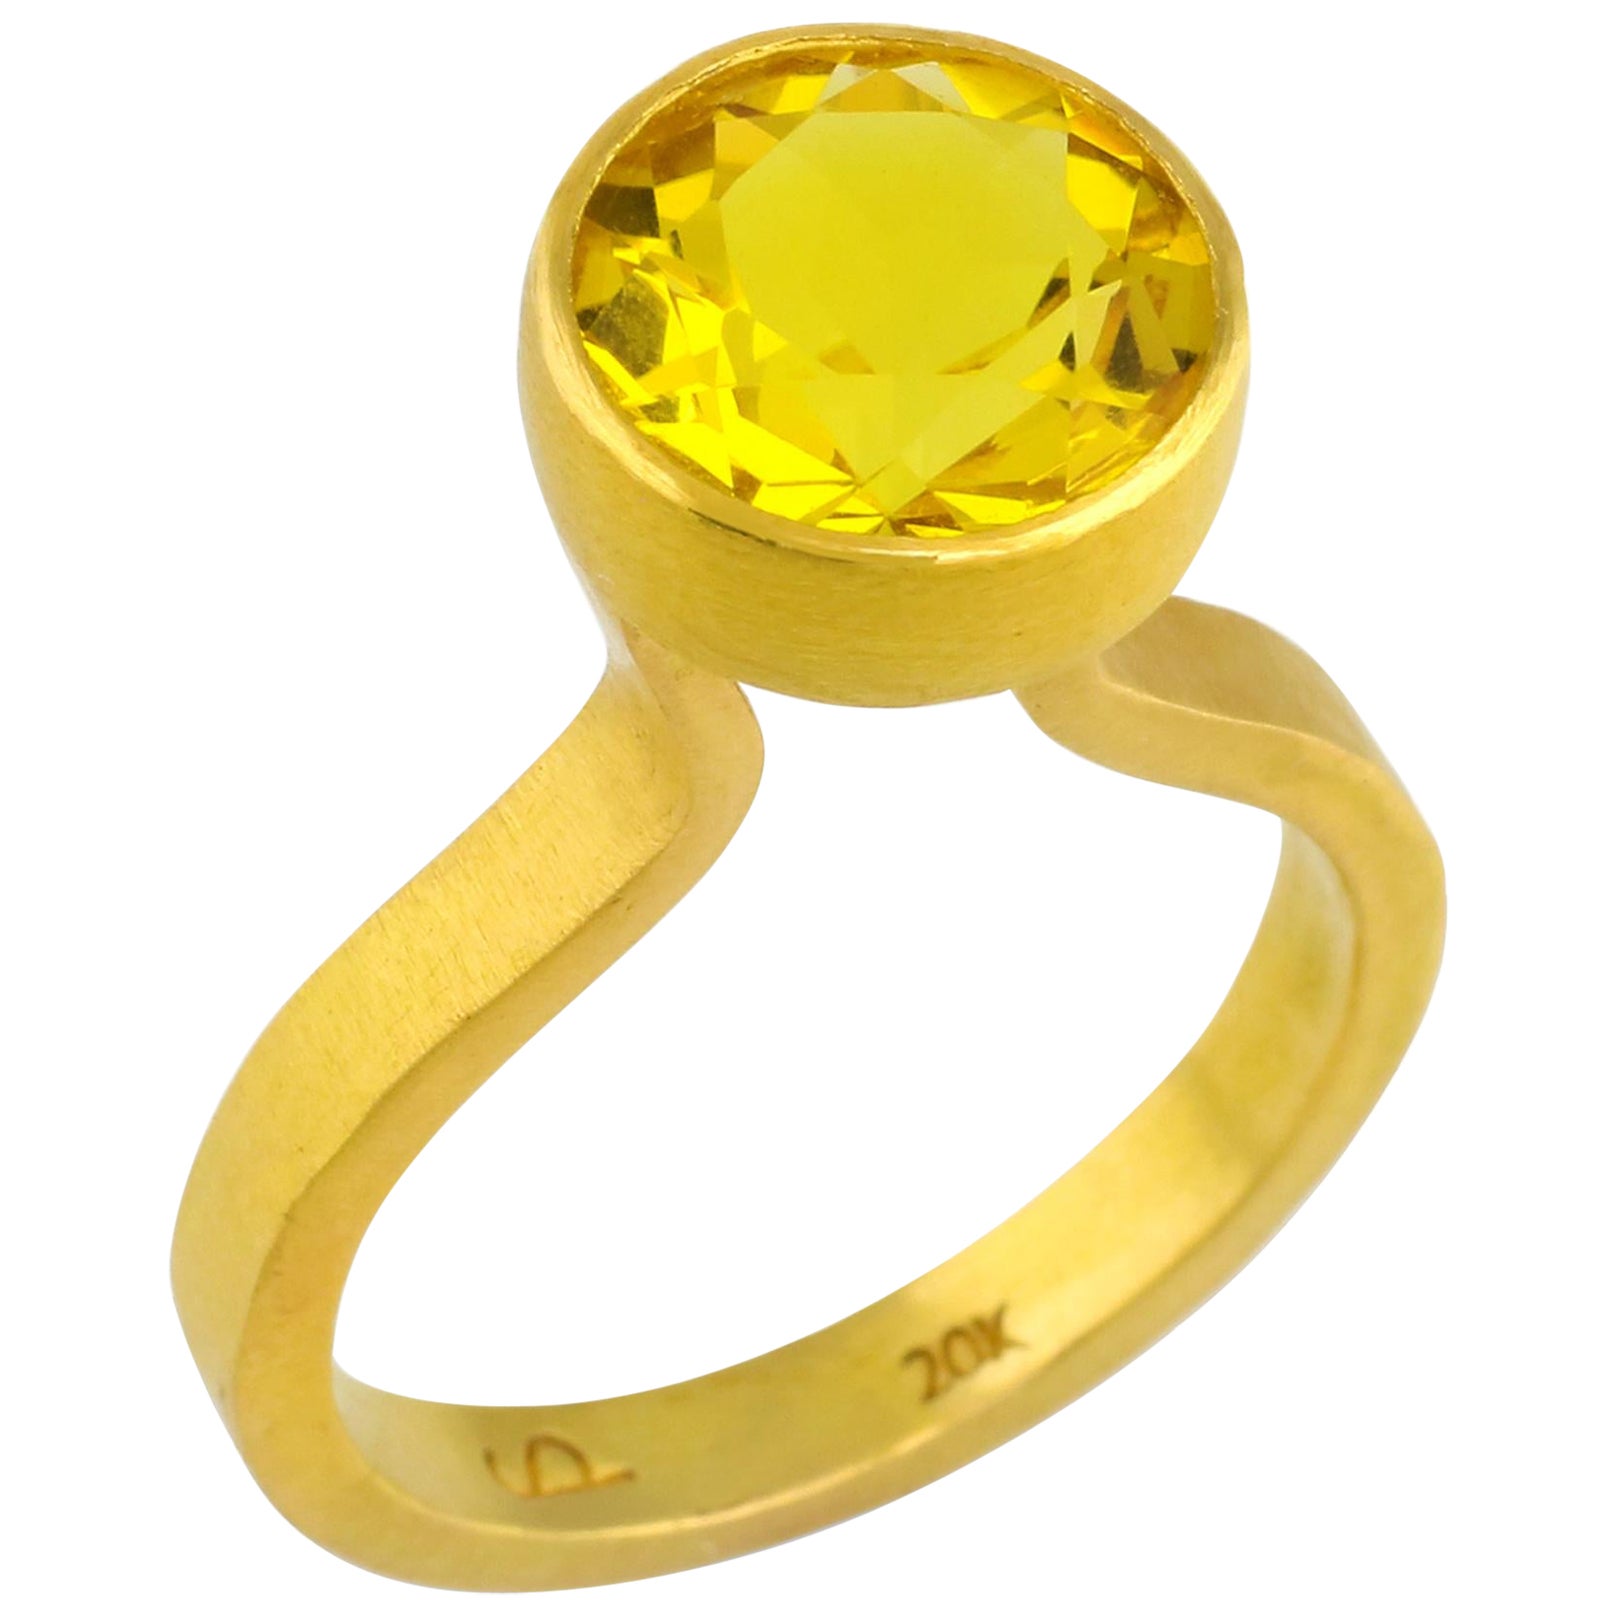 PHILIPPE SPENCER 3.25 Ct. Lemon Color Citrine in 22K and 20K Gold Statement Ring For Sale